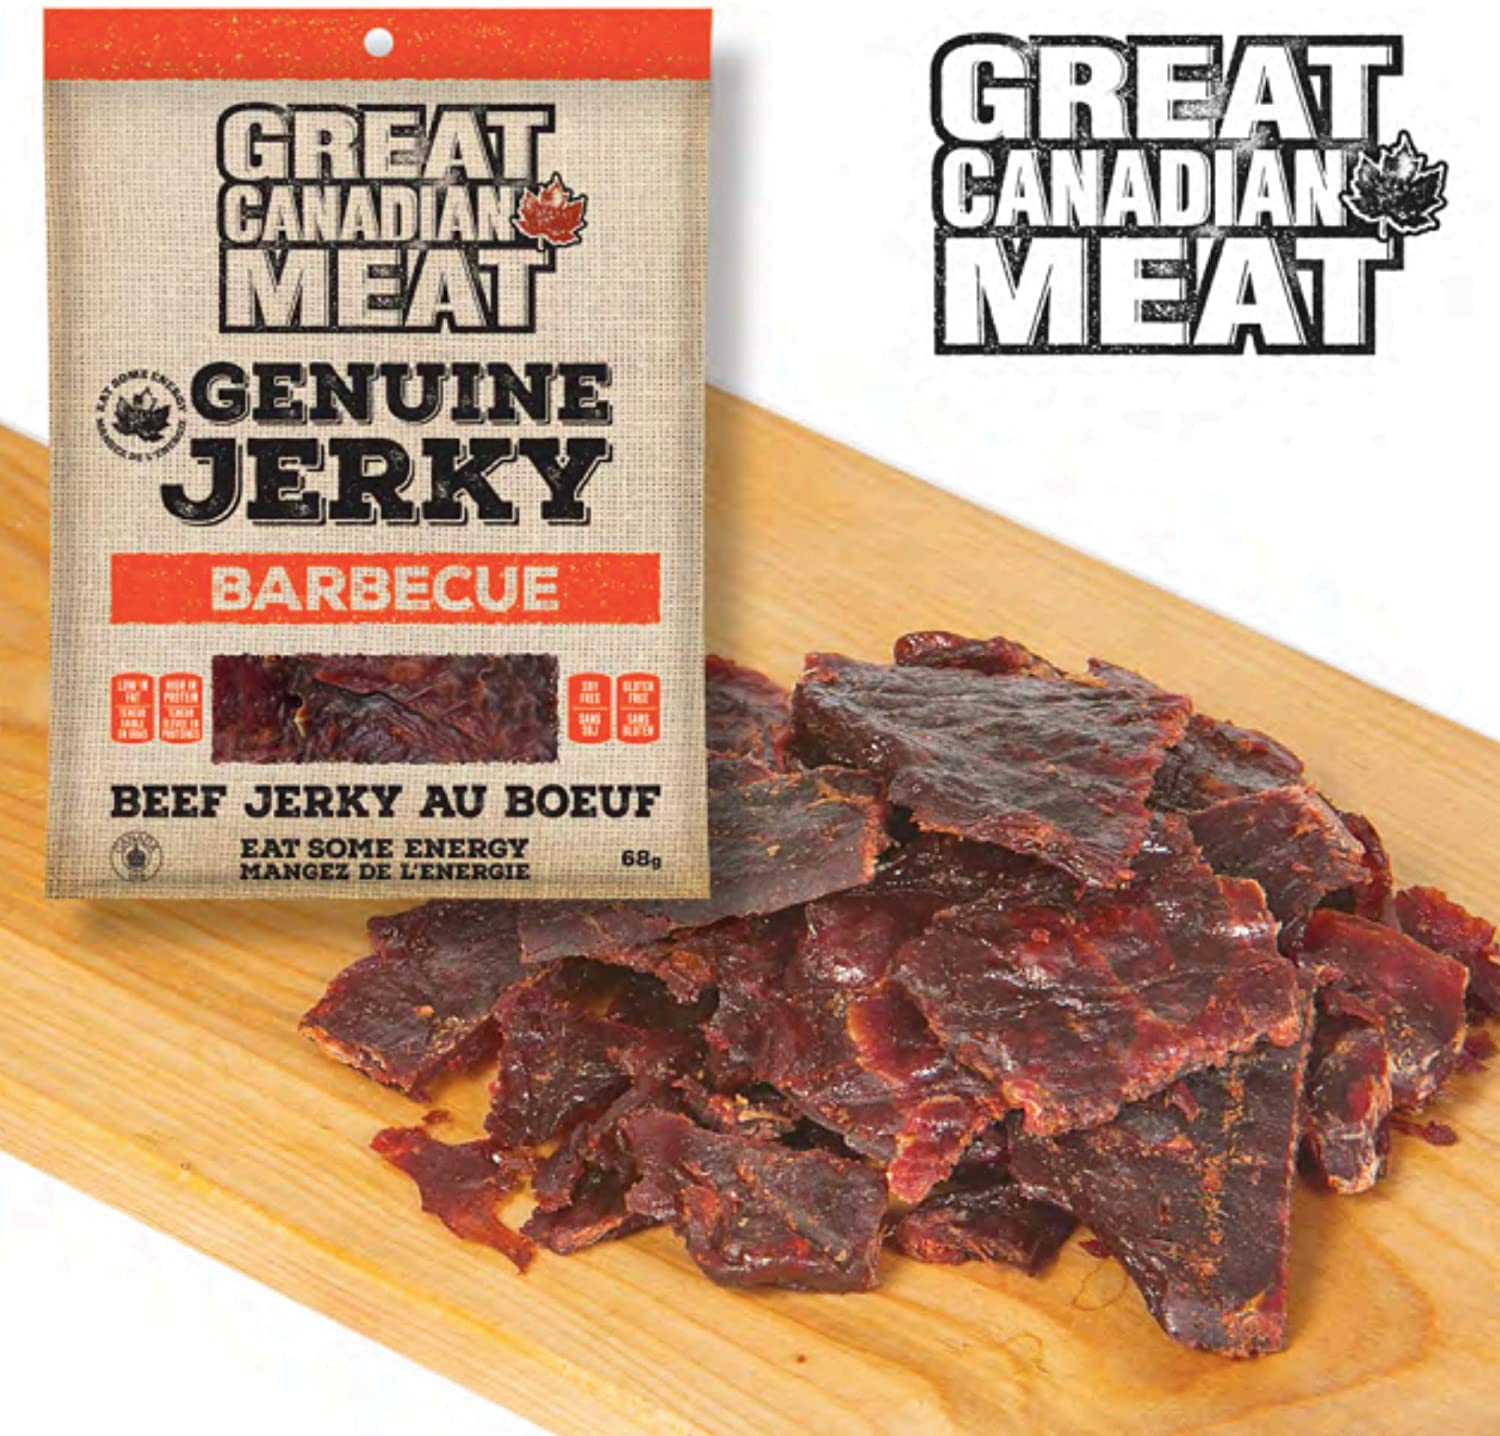 Barbecue Beef Jerky (Great Canadian Meat)_1_cc